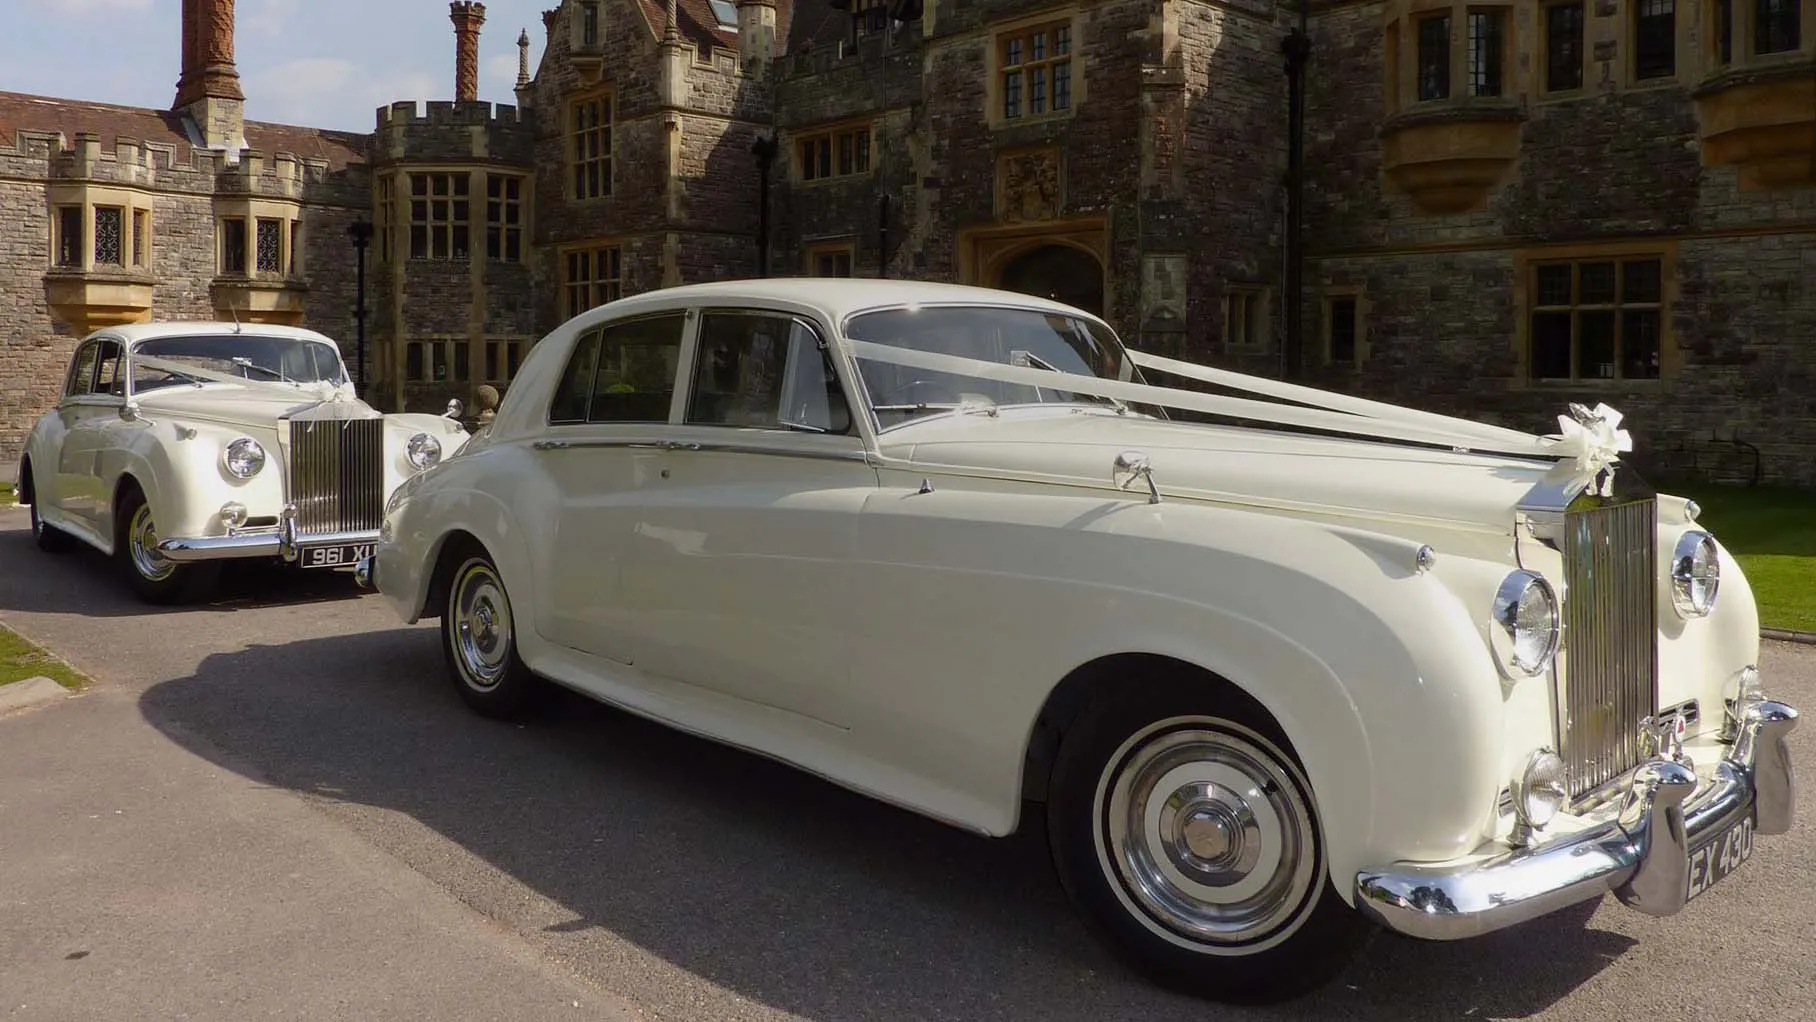 Ivory classic 7-seater Austin Princess Limousine dressed with a traditional V-shape ivory ribbons across its front bonnet. Vehicle is standing in the middle of a path in a Colchest